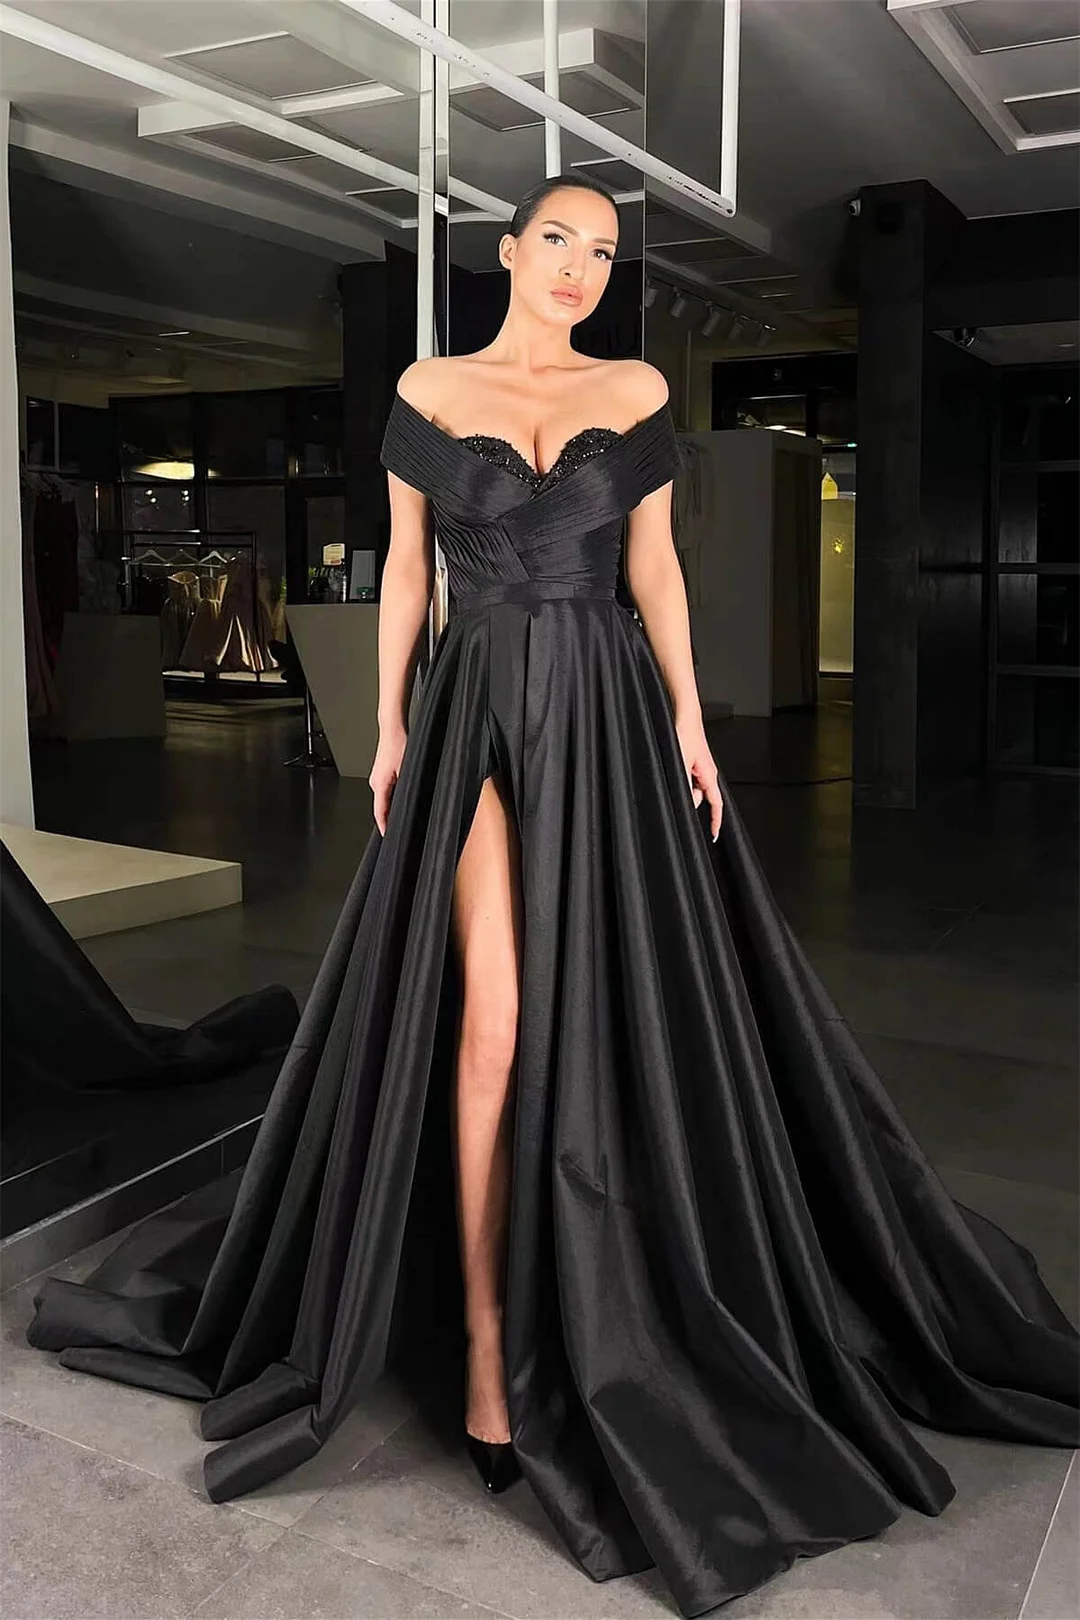 Amazing Black Off-the-Shoulder Evening Dress Split Long With Beads - lulusllly